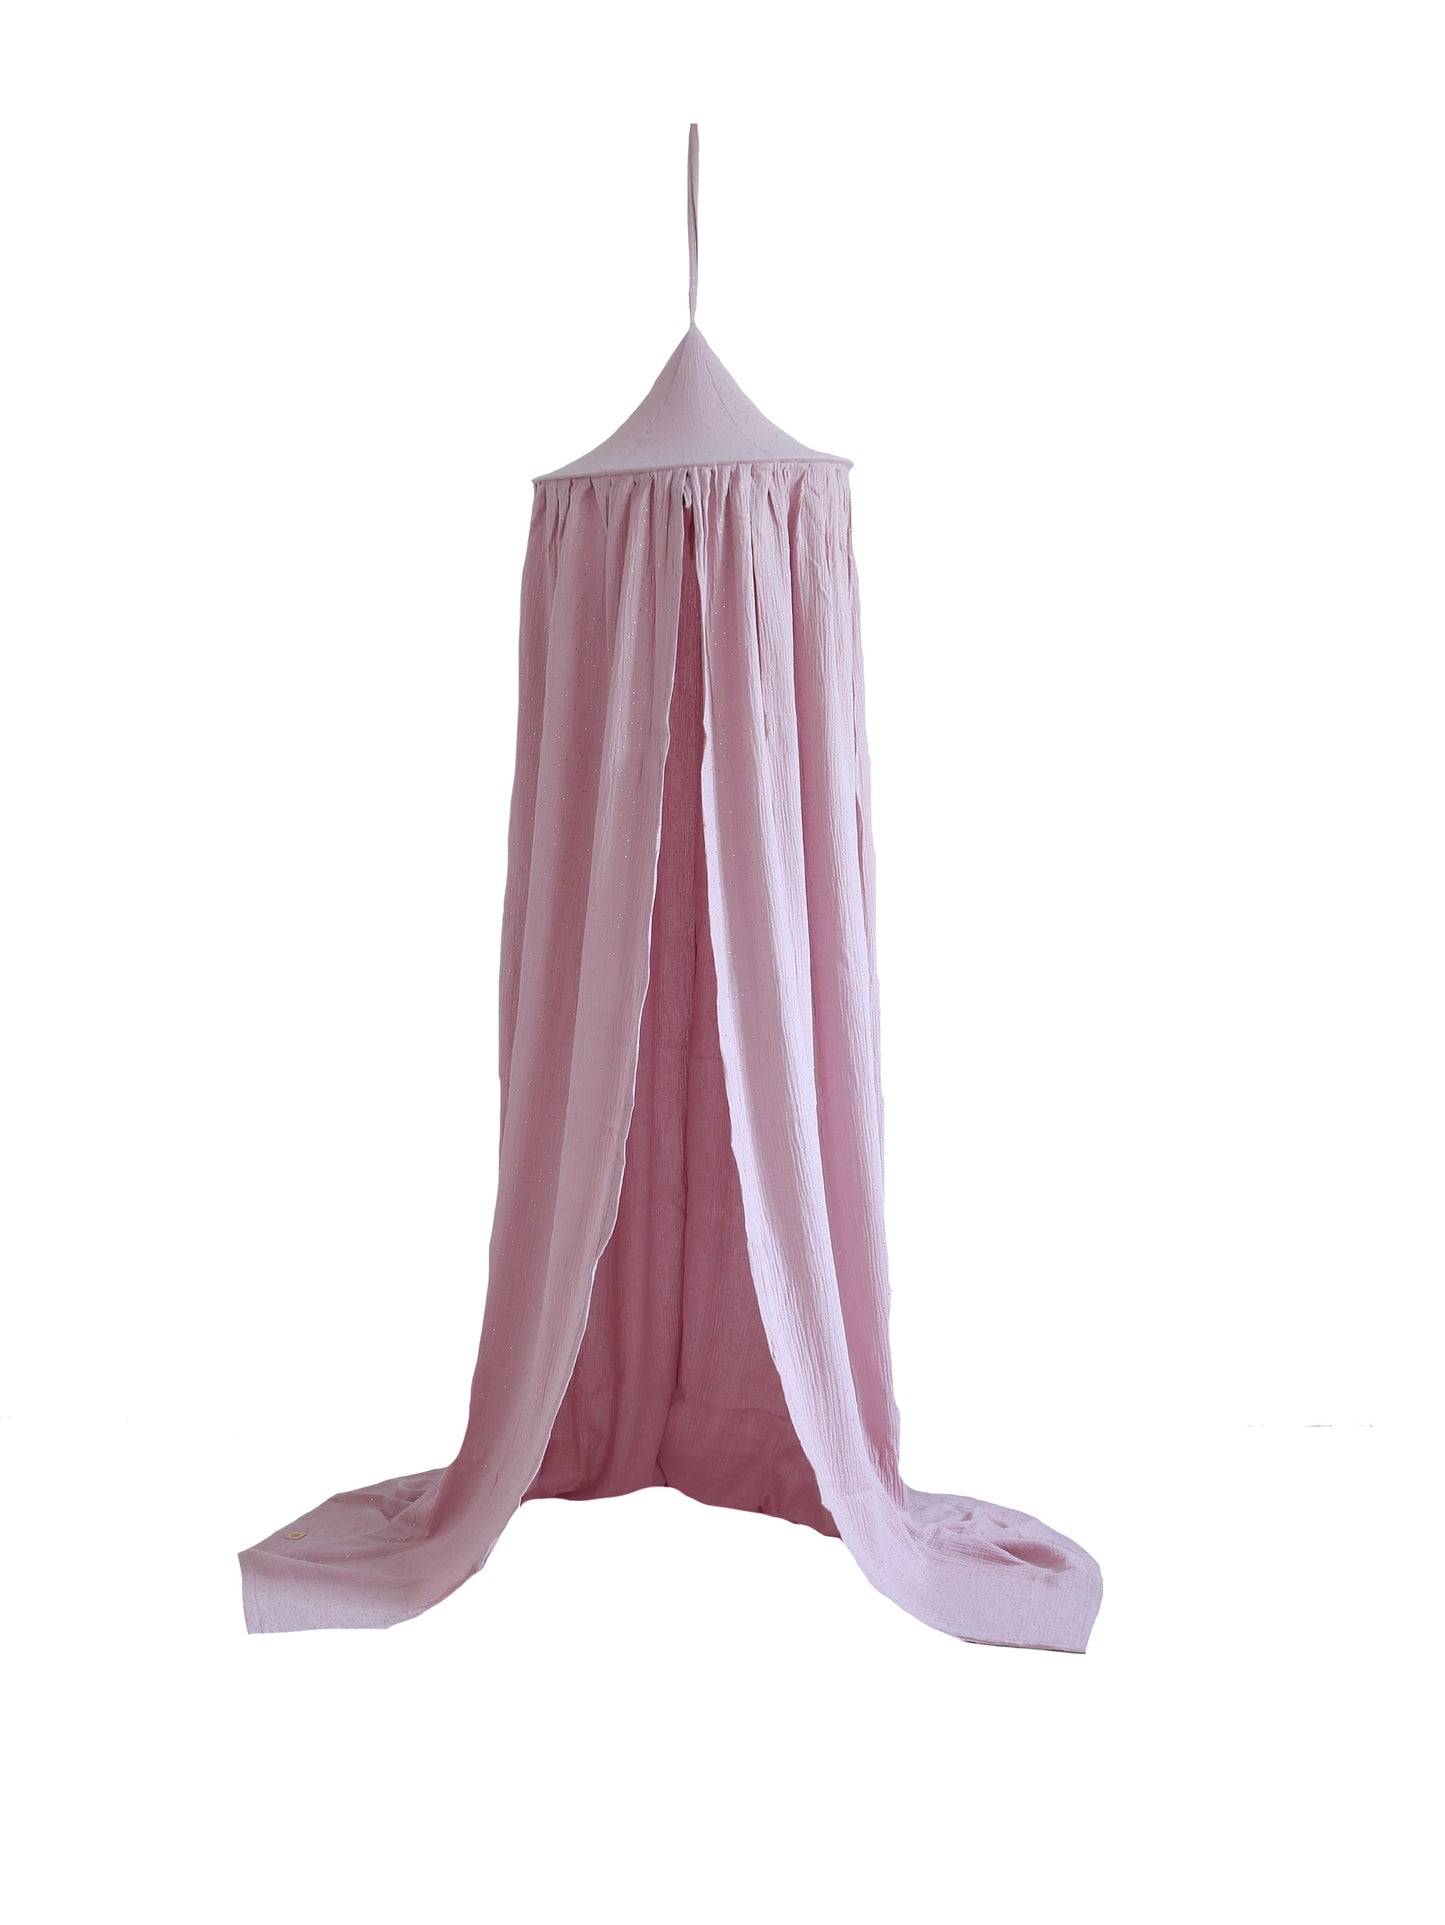 Moi Mili Bed canopy, Pink and Gold